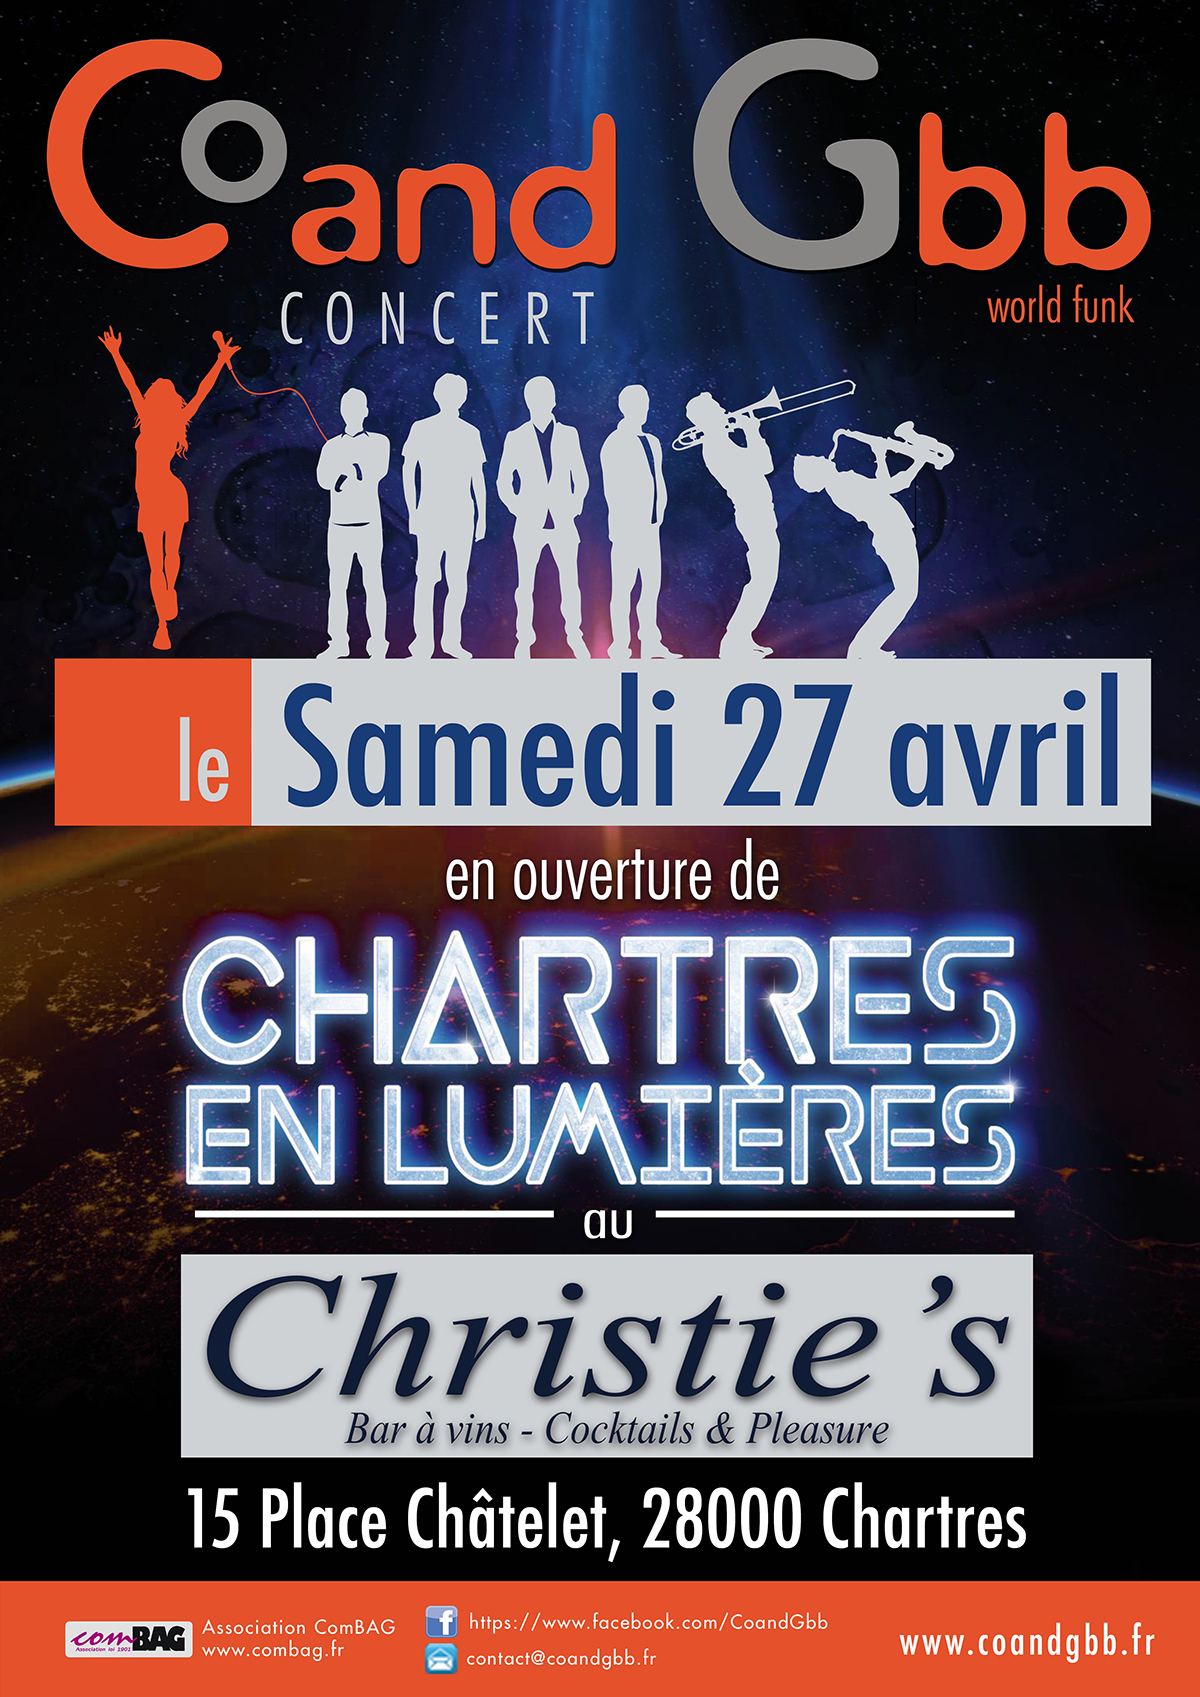 Concert 27 avril 2019 - CHRISTIE'S / CHARTRES